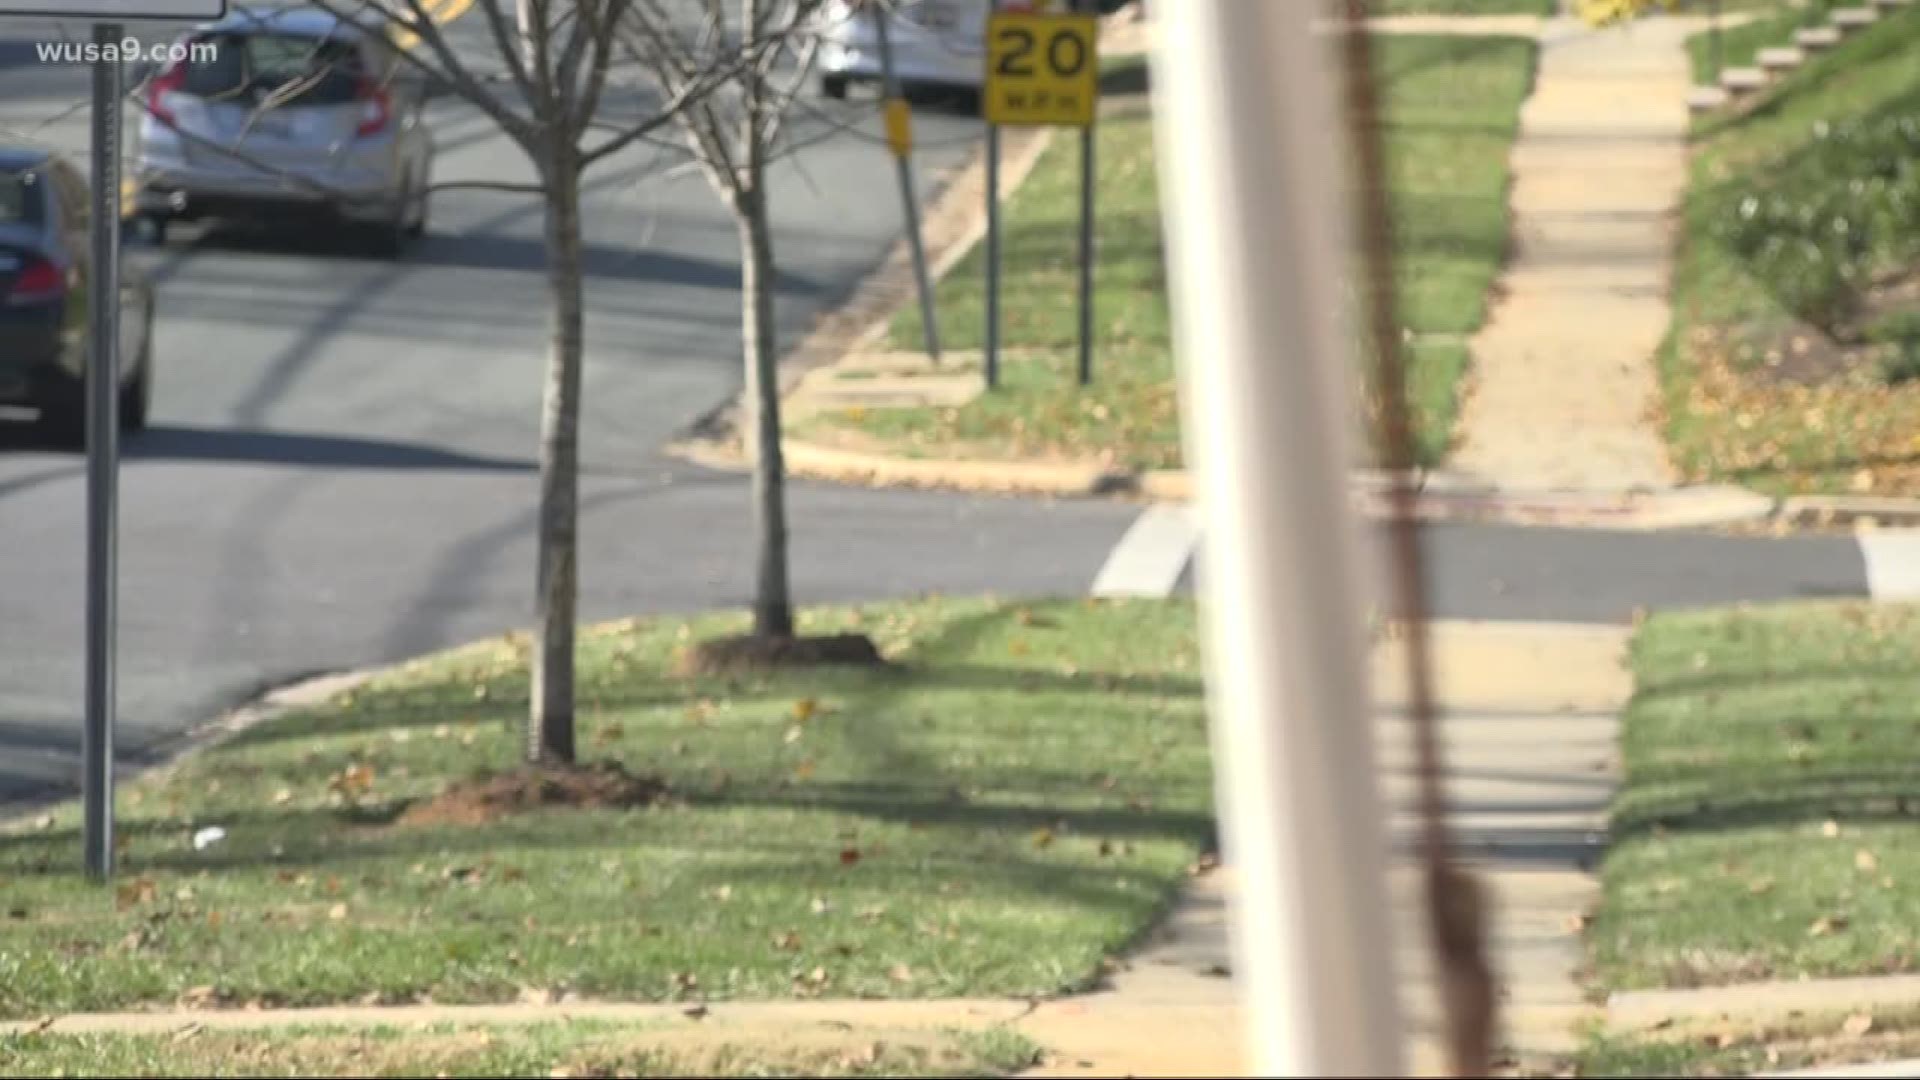 Potomac residents want speed cameras installed on Postoak Road, a road off 270 and Seven Locks Road that they say is now a favorite short cut for drivers to speed on